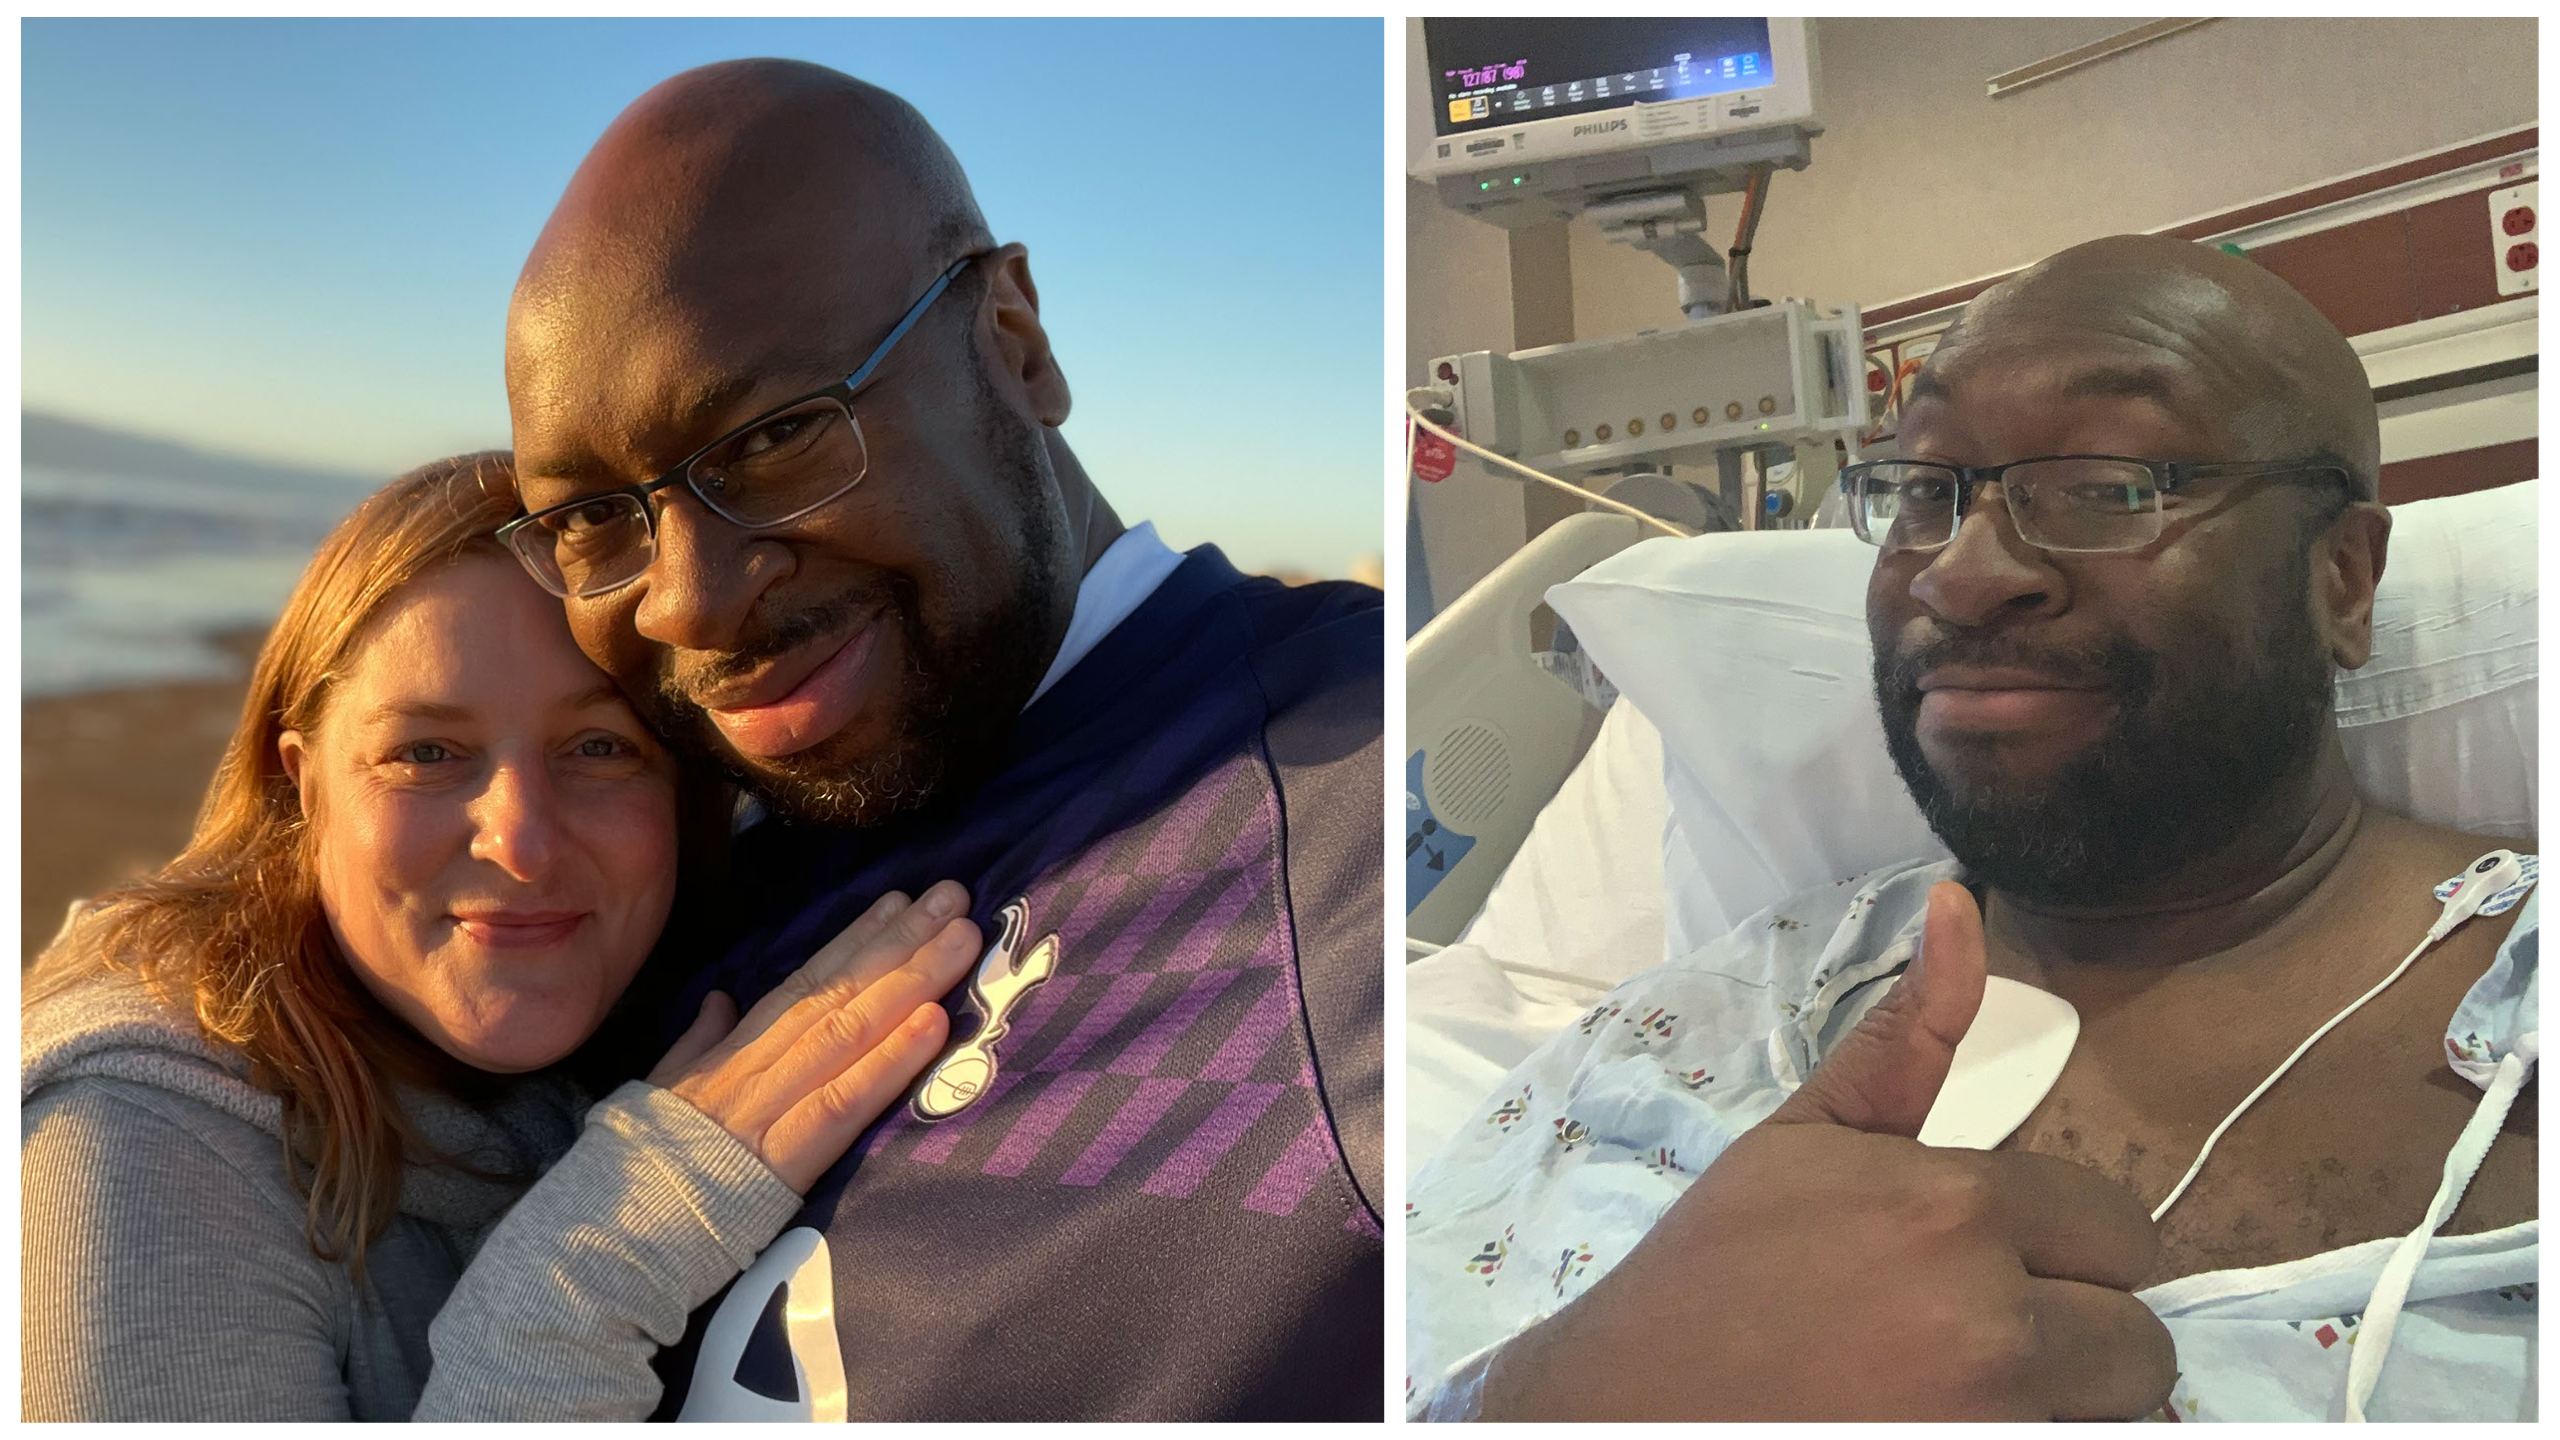 Through a commitment to quick action and cardiac rehabilitation, George restored his heart health to live his happily-ever-after with his new wife.